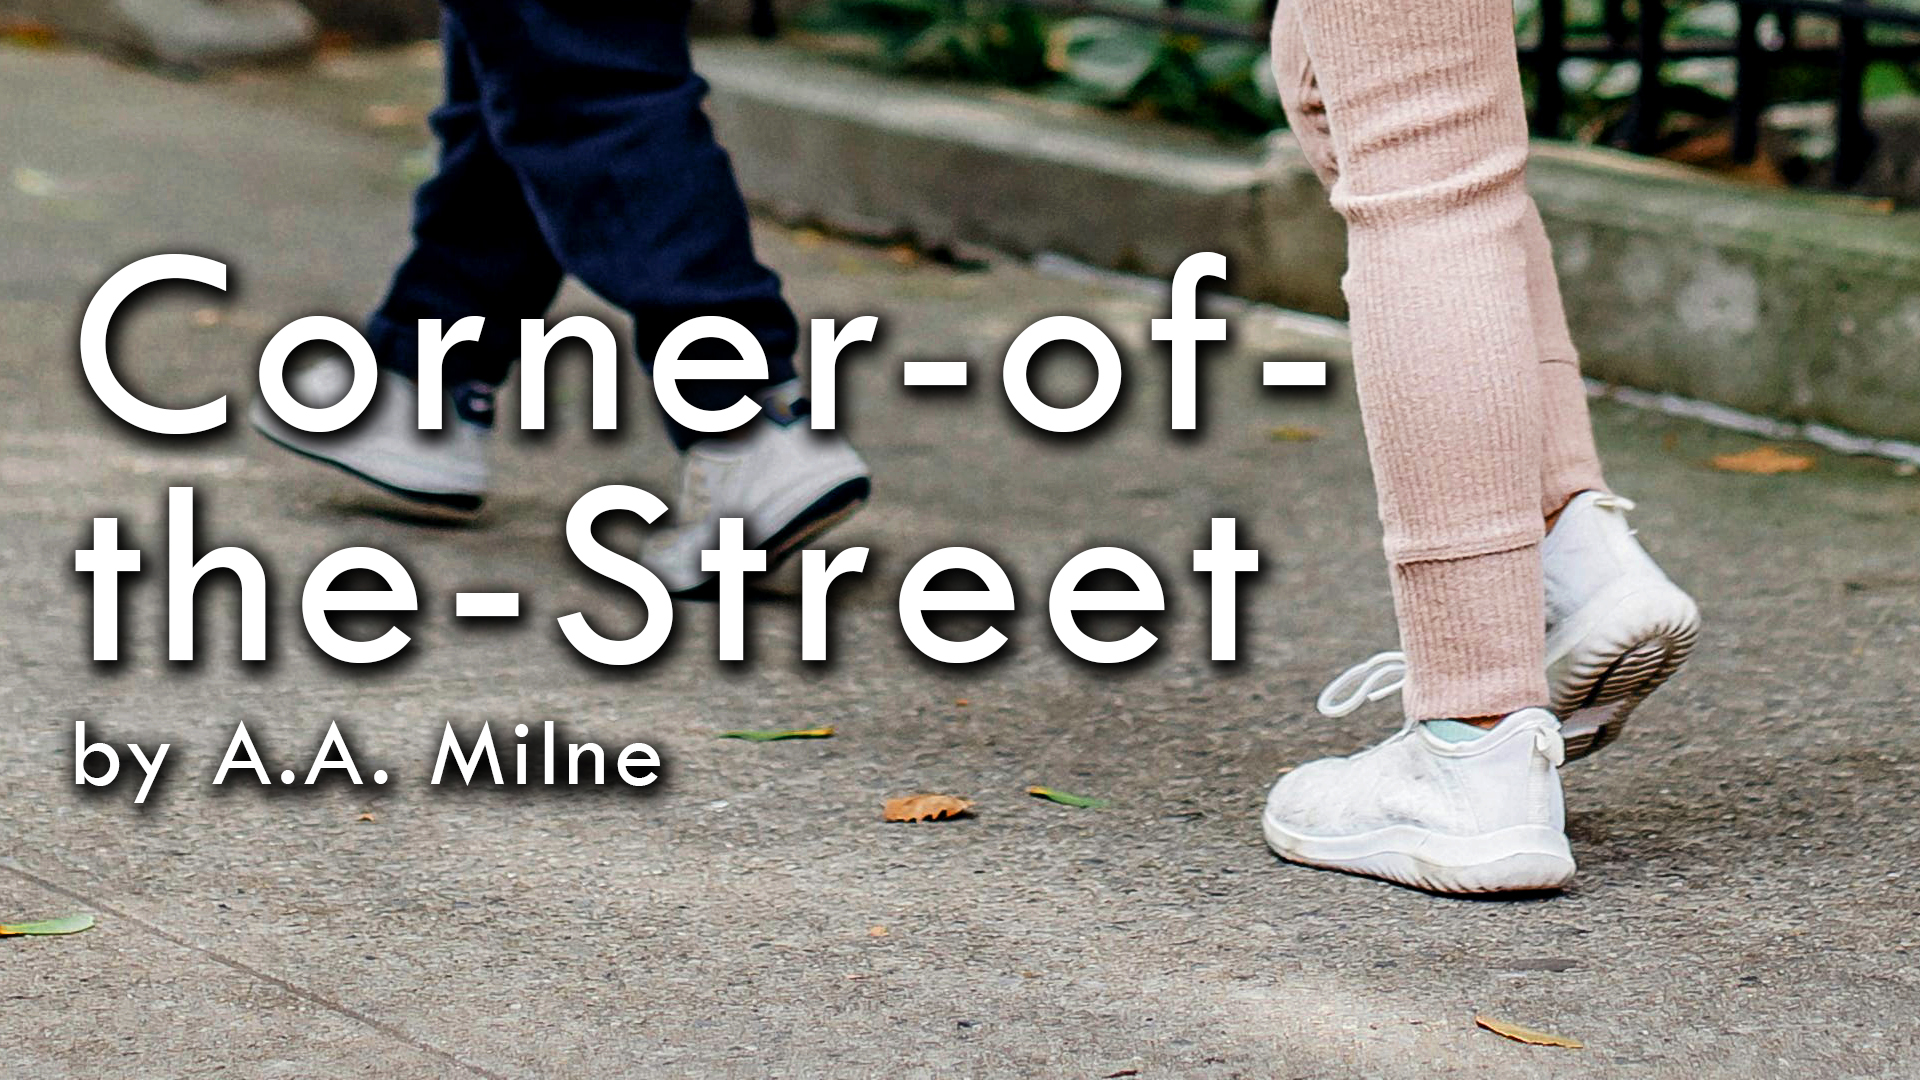 "Corner-of-the-Street" by A.A. Milne. Read by Zack Lawrence